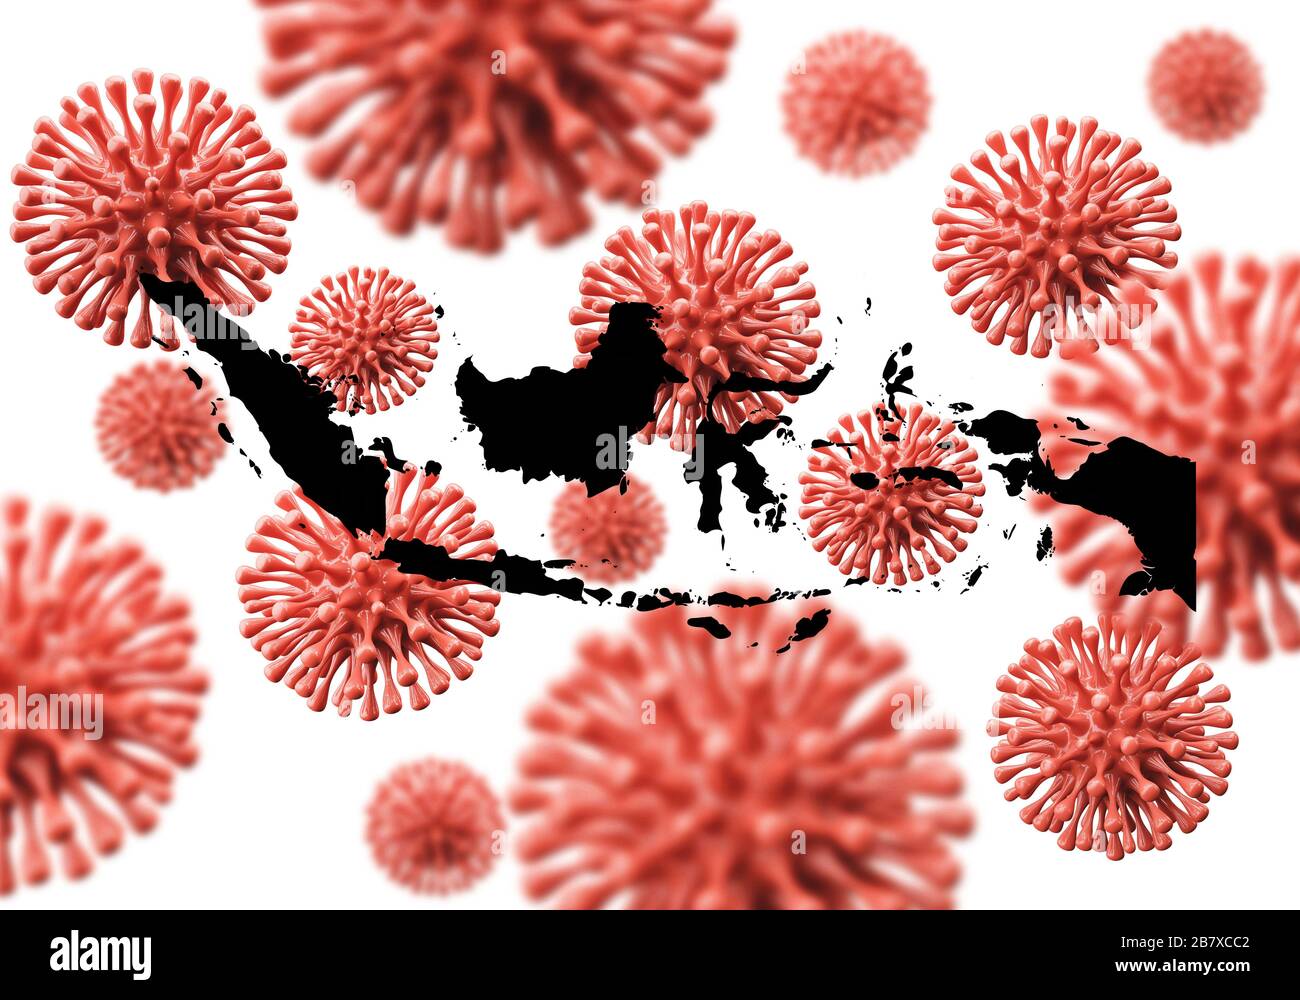 Indonesia map over a scientific virus microbe background. 3D Rendering Stock Photo